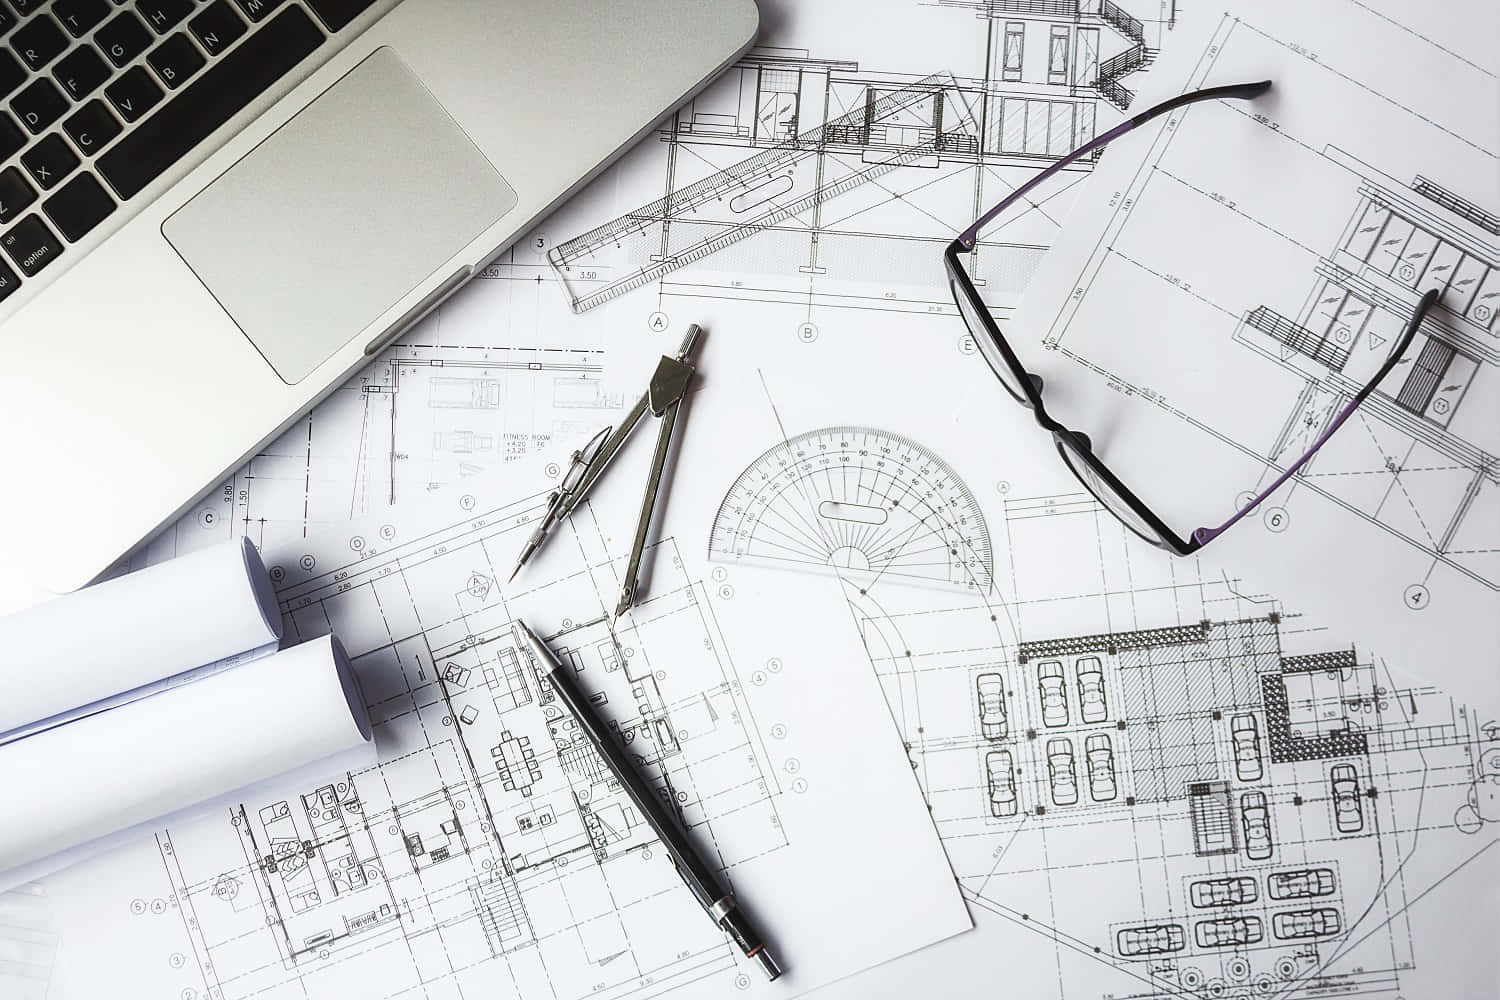 A Laptop, Glasses And Architectural Plans On A Table